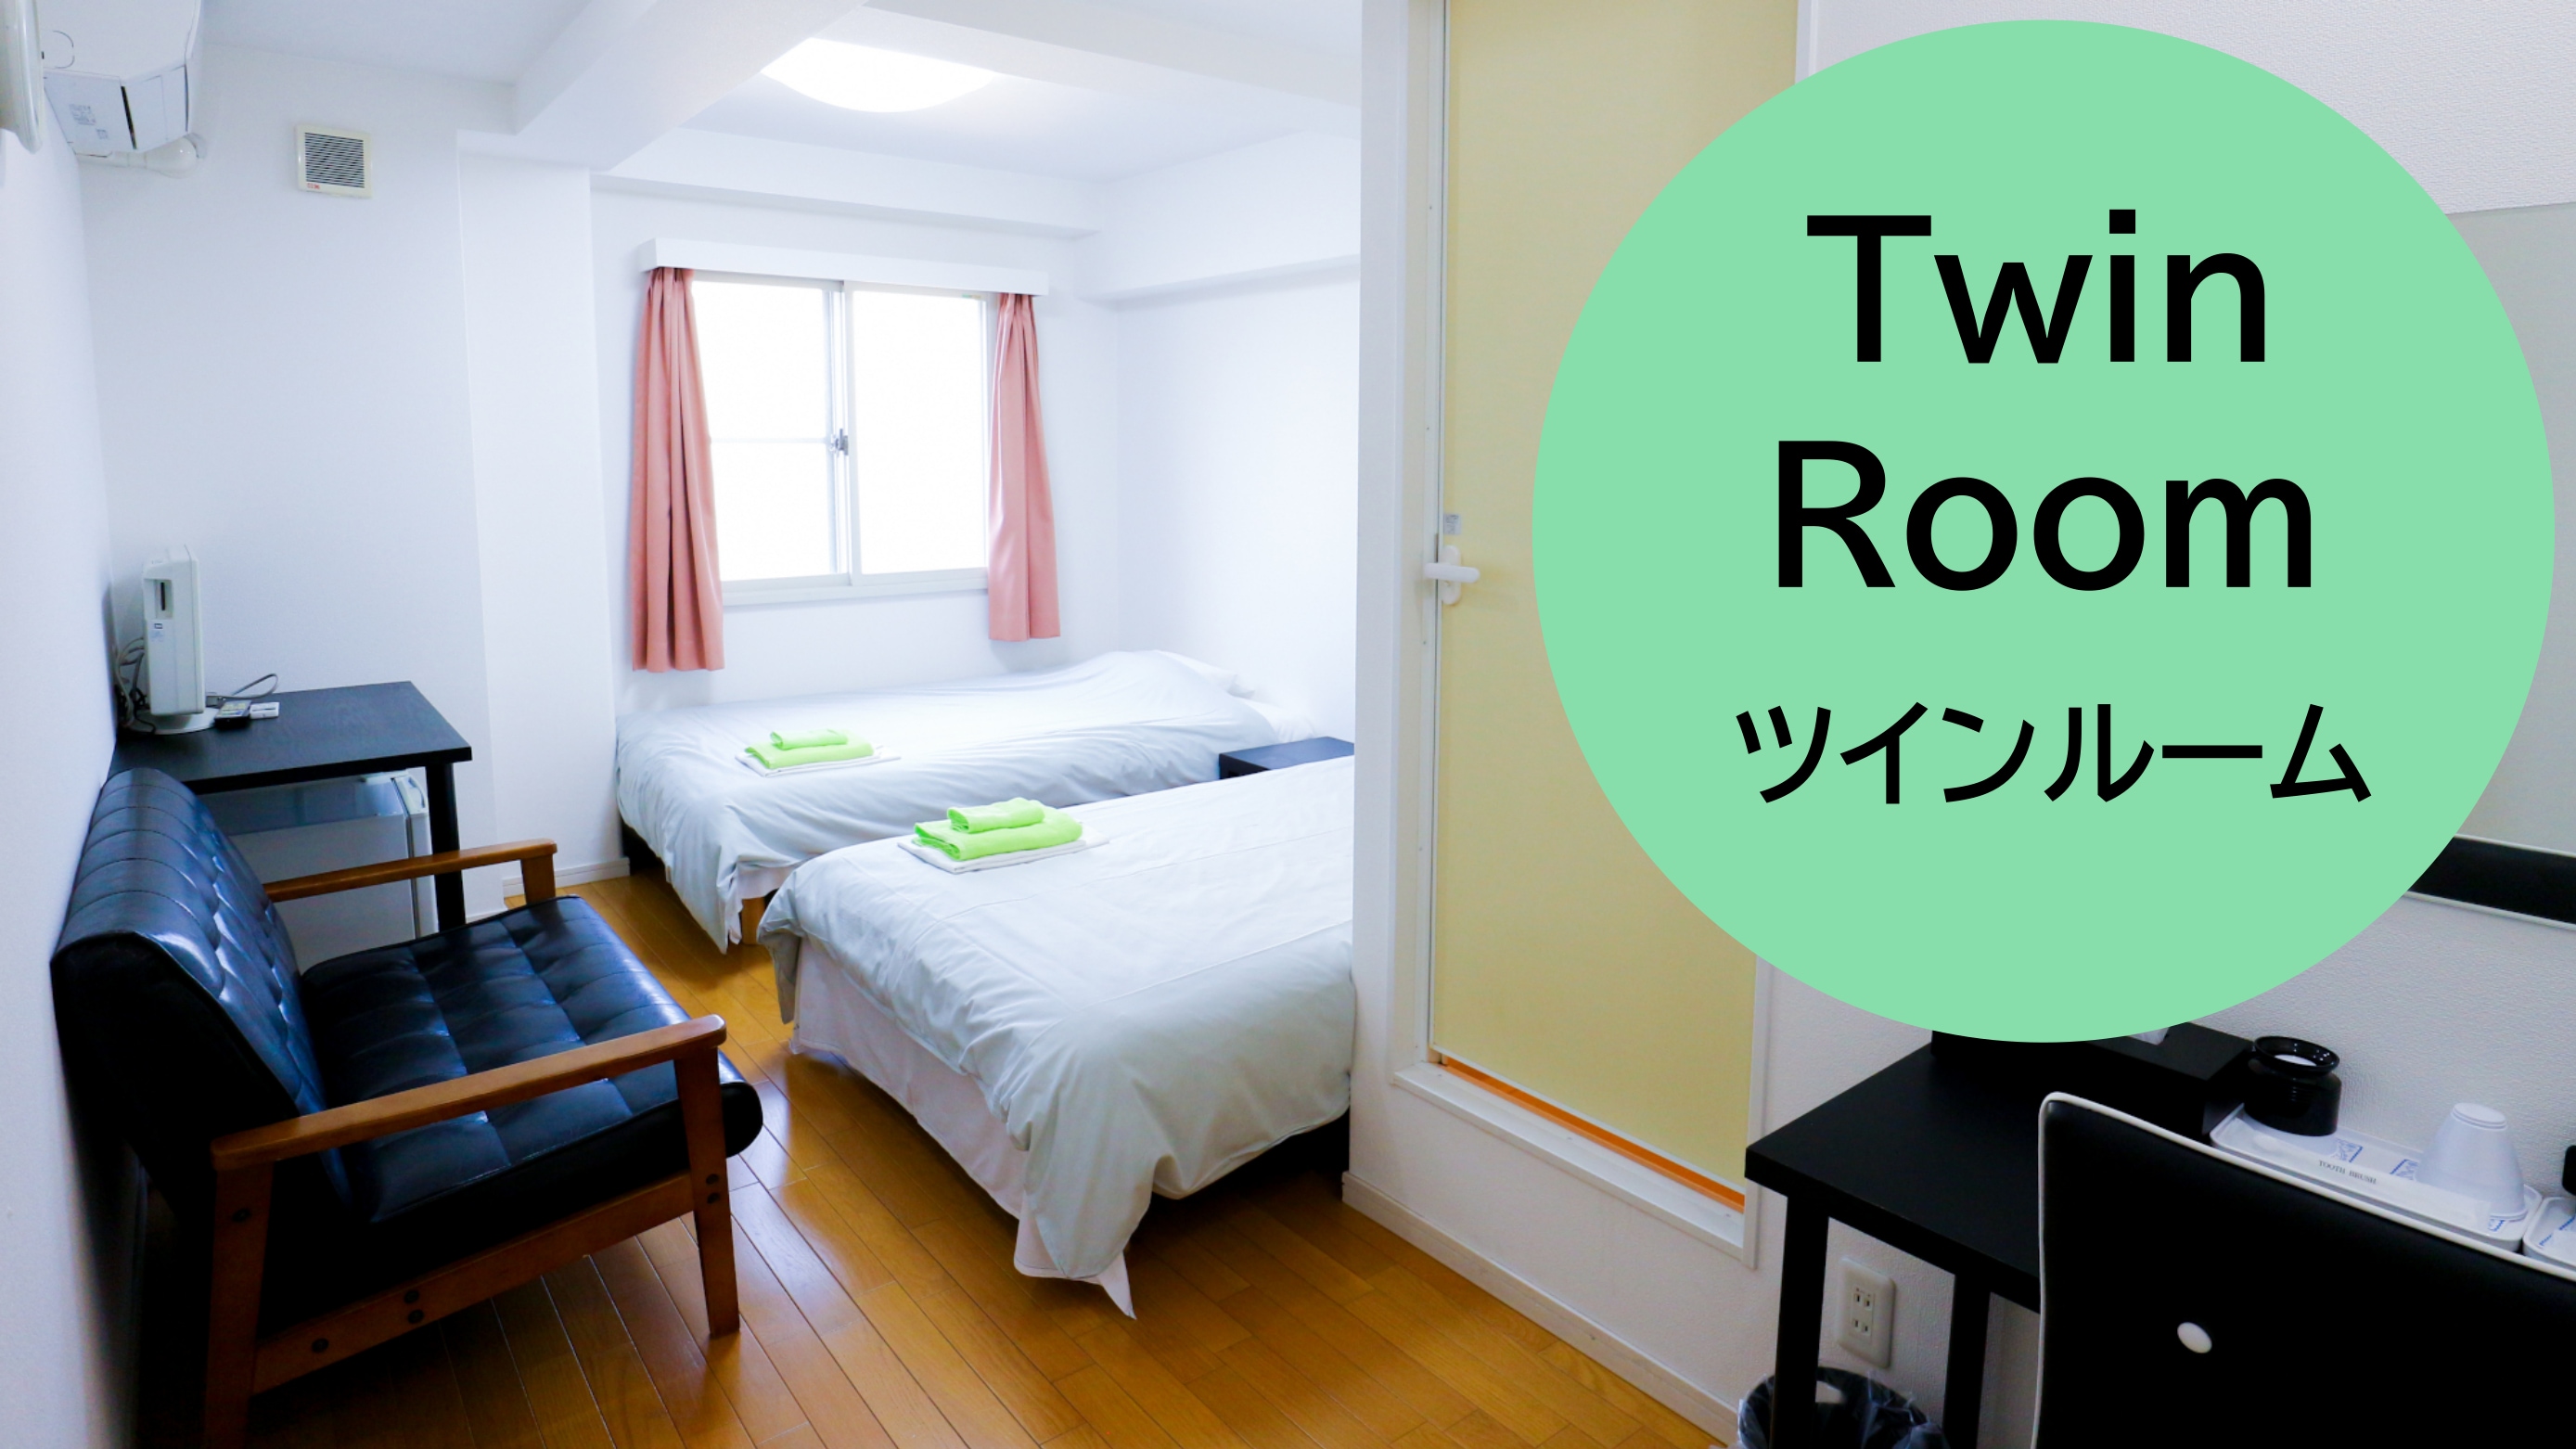 Twin room with letters